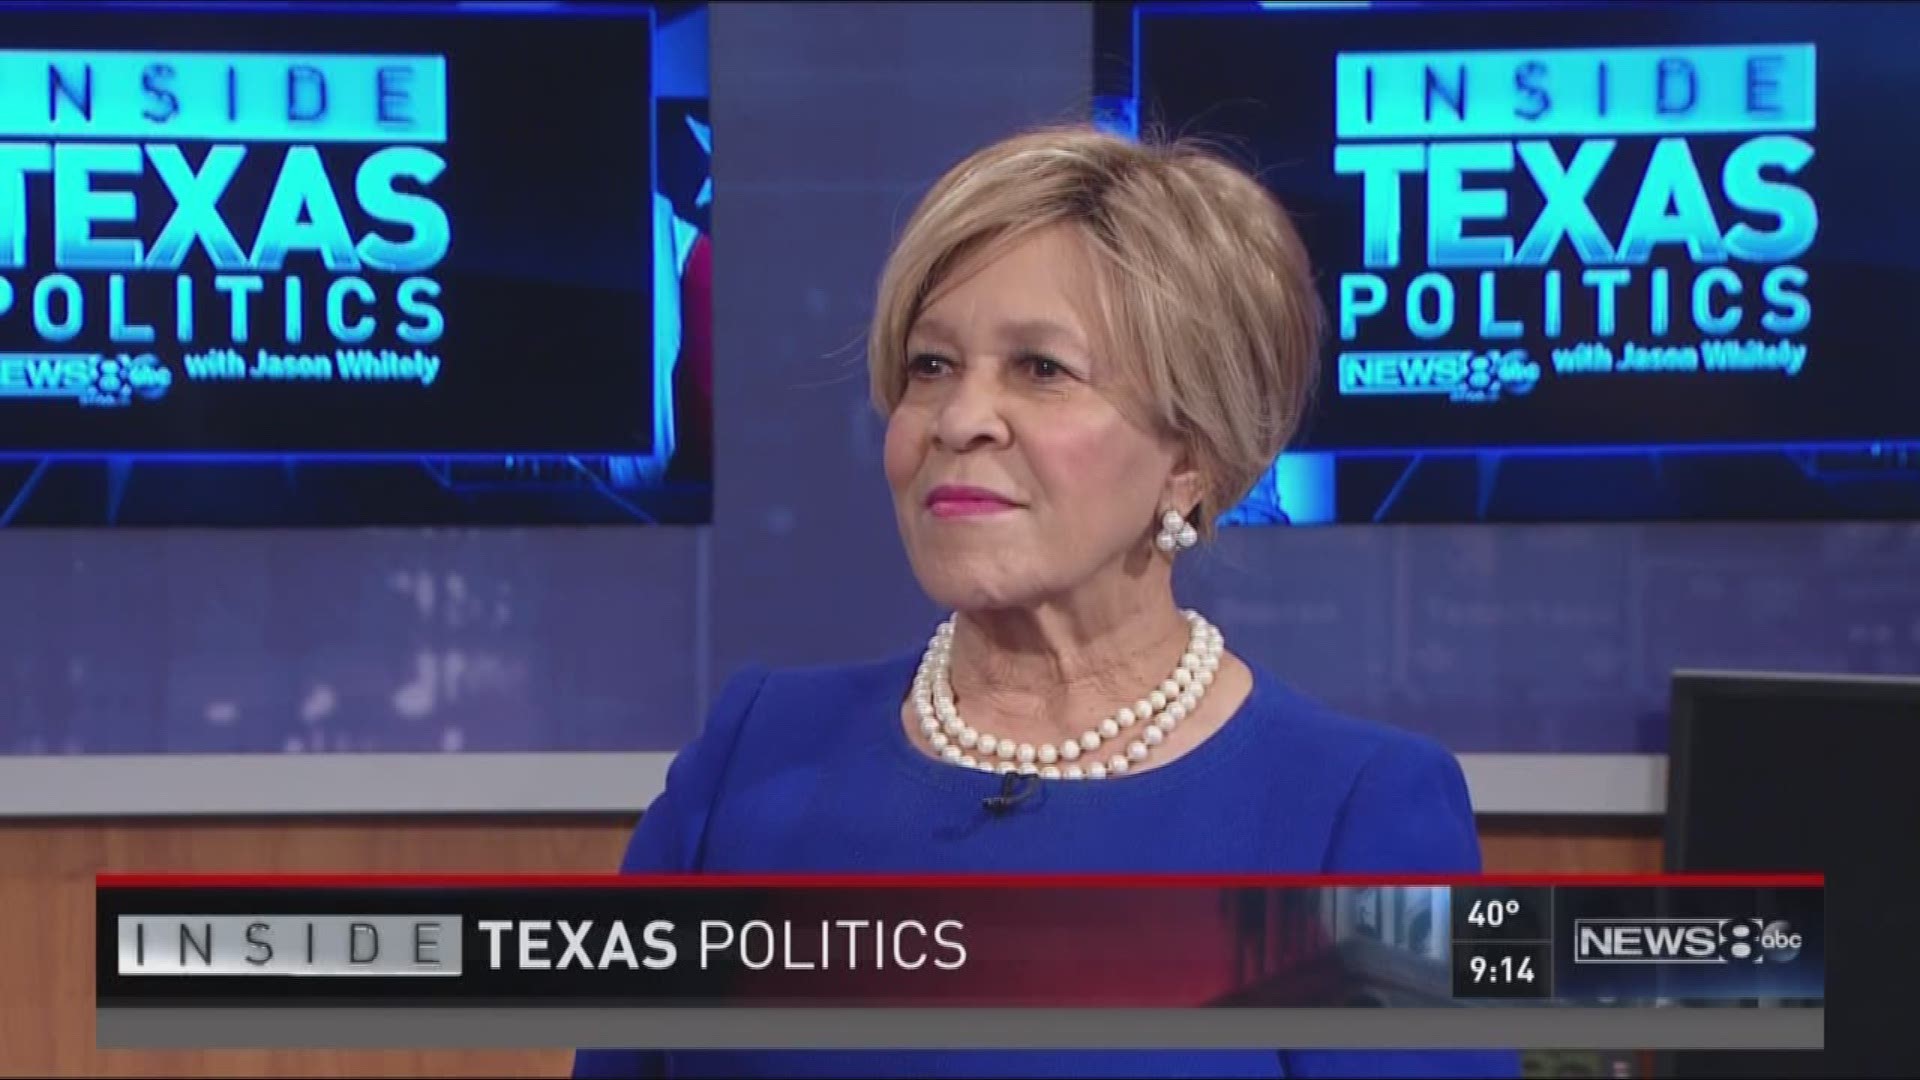 There are 150 members in the Texas House of Representatives, but only 29 are women. That's less than one in five. State Rep. Helen Giddings is bringing some of the most successful women leaders to Texas next weekend to build more women leaders. She joined